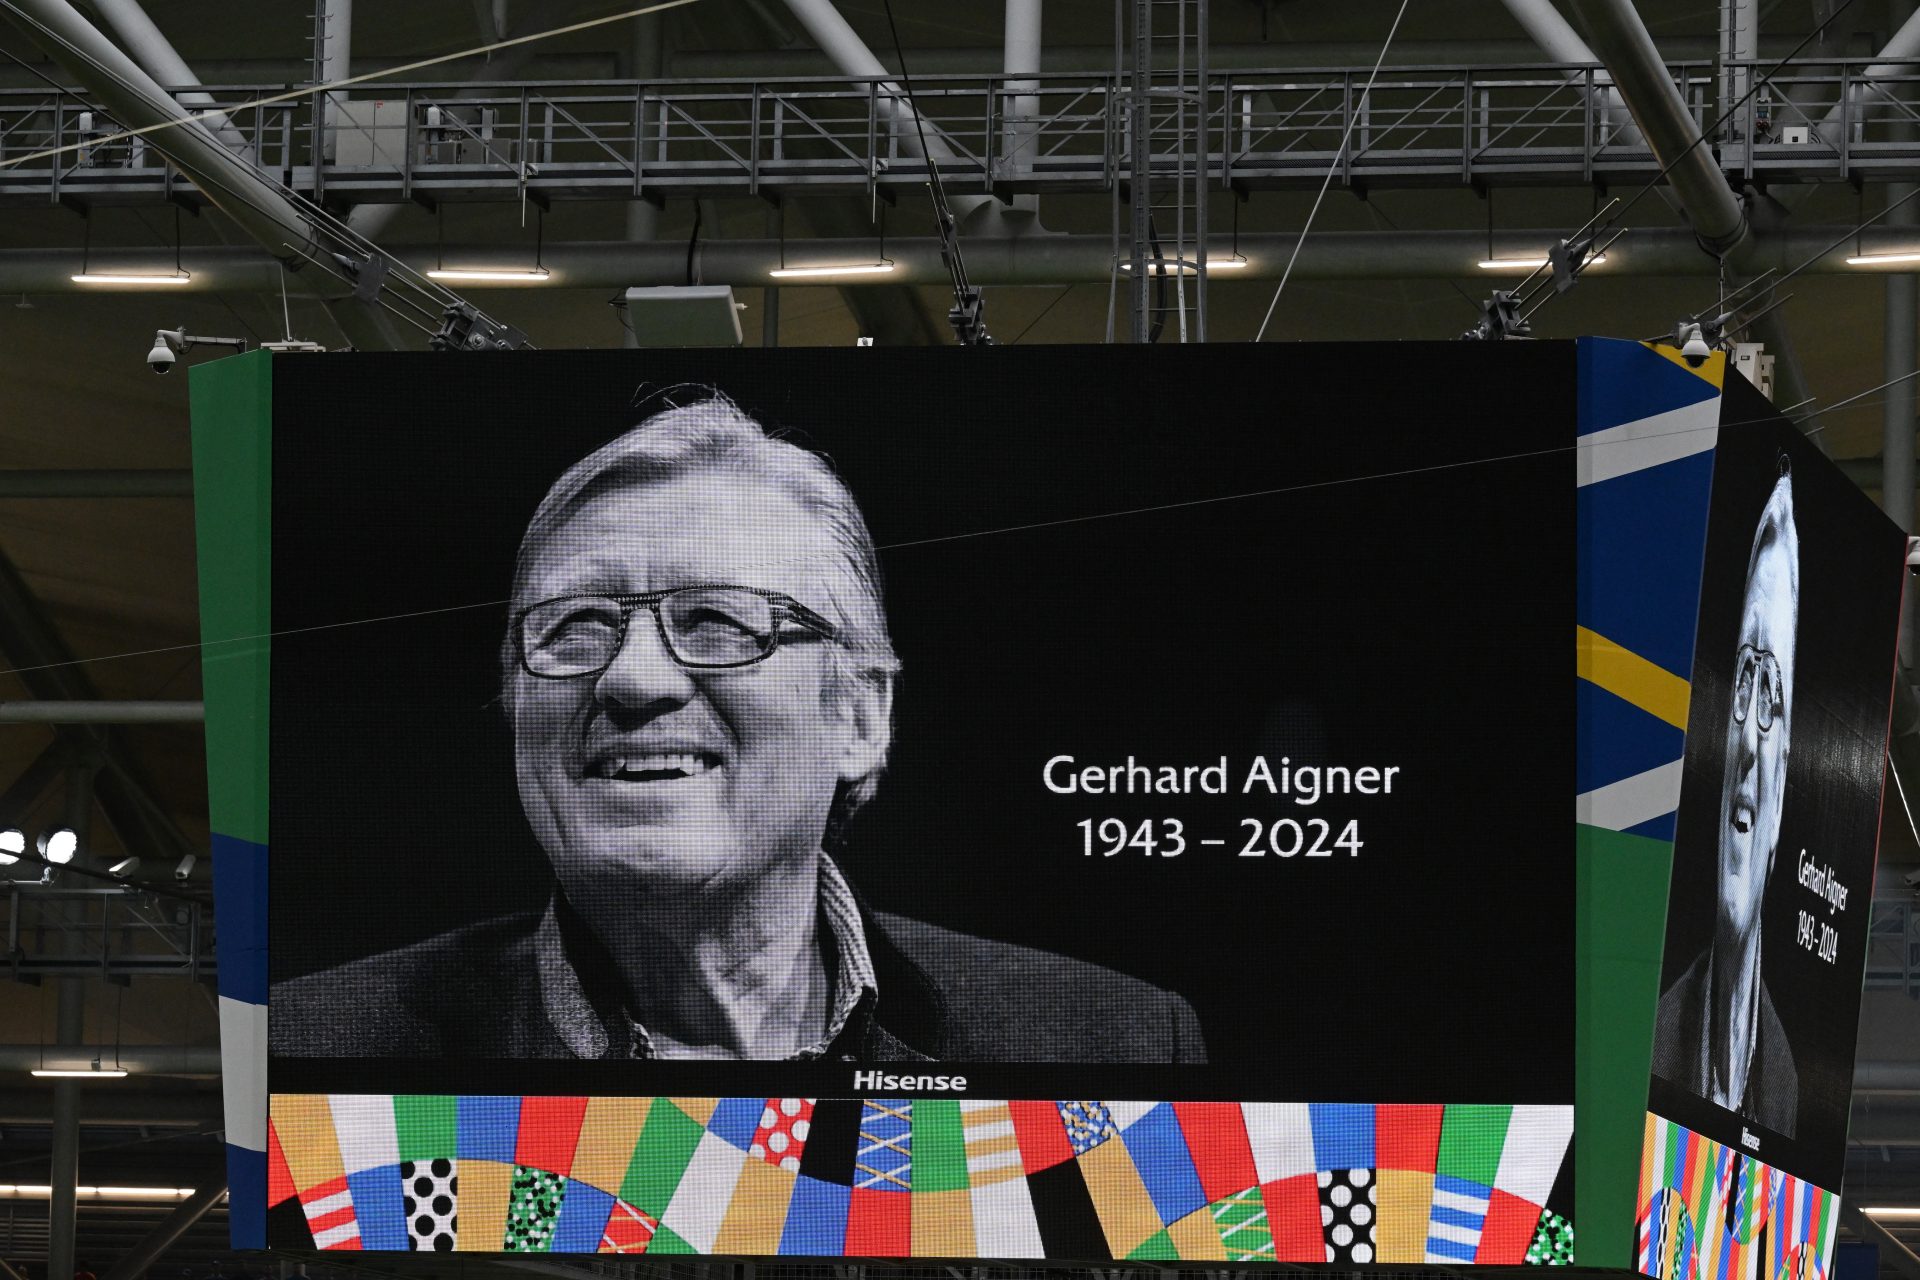 UEFA mourns the death of Gerhard Aigner at the age of 80